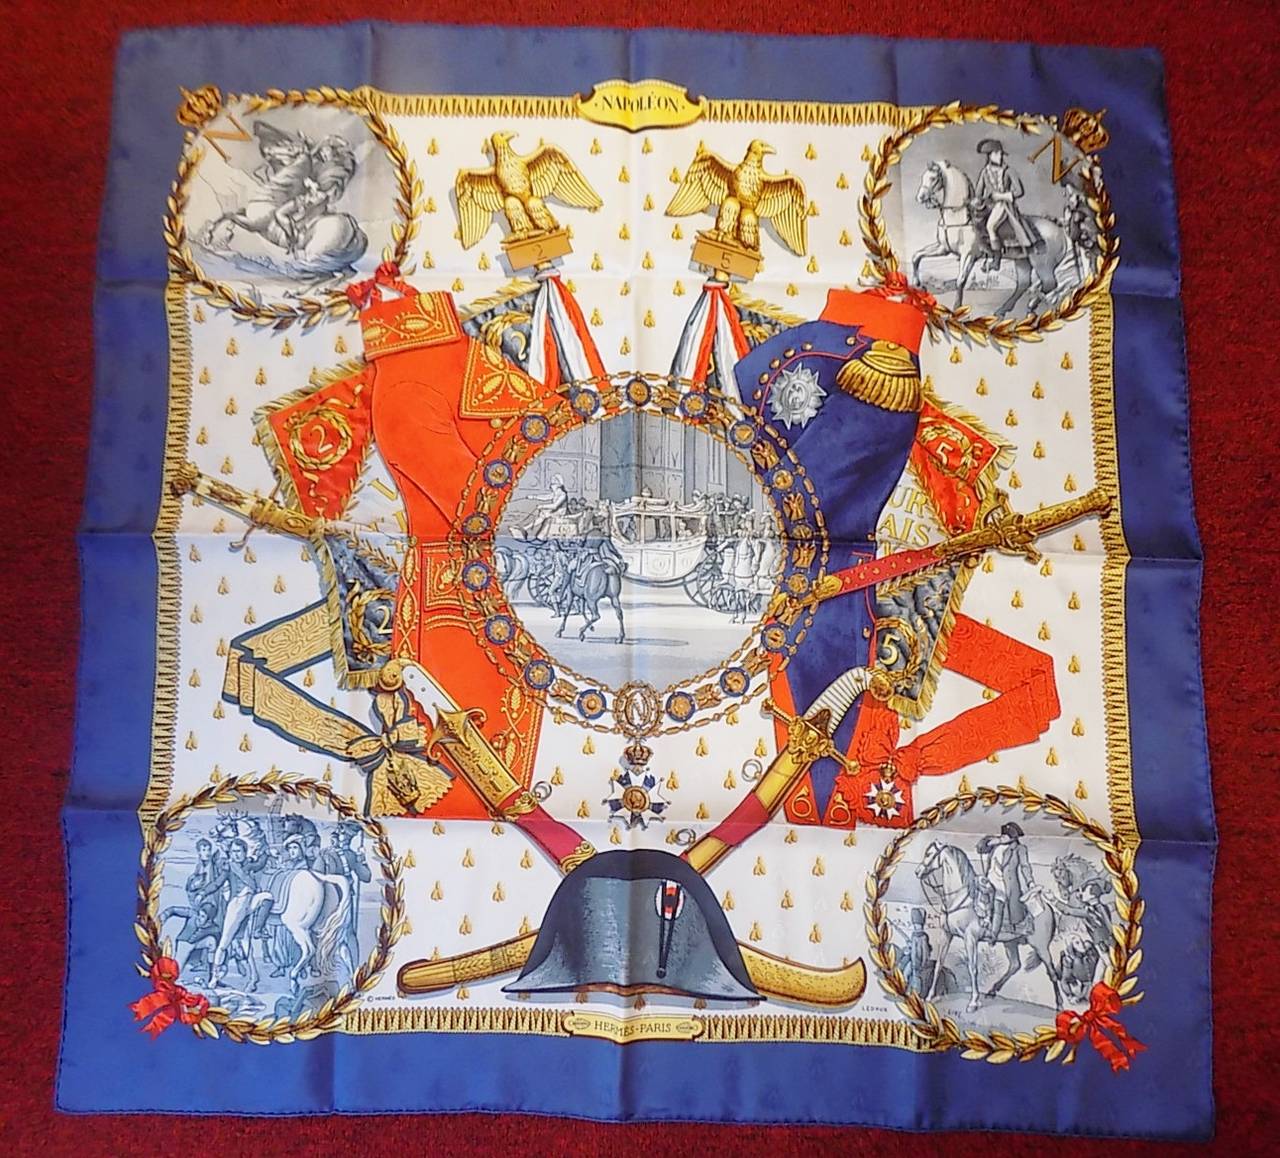 This is a  A must-have for any Hermès scarf collection.  Rich navy blue  border  with red and gold . Philippe Ledoux’s 1963 Napoleon is the quintessential Hermès scarf. The emperor’s beloved bees are screened onto the scarf as part of the design